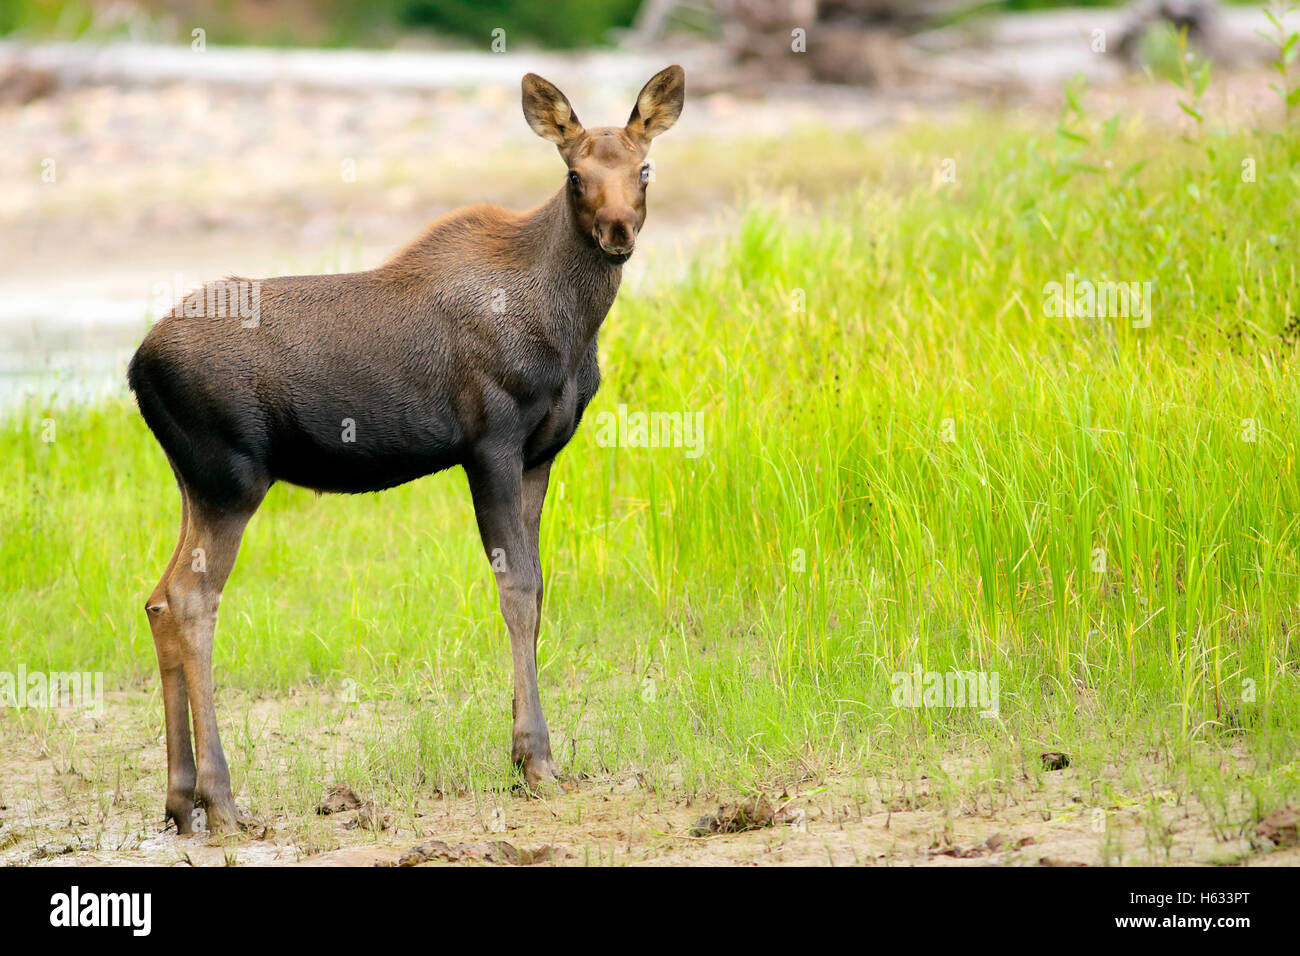 Curious Baby Moose, few month old,  standing in grass near river. Stock Photo